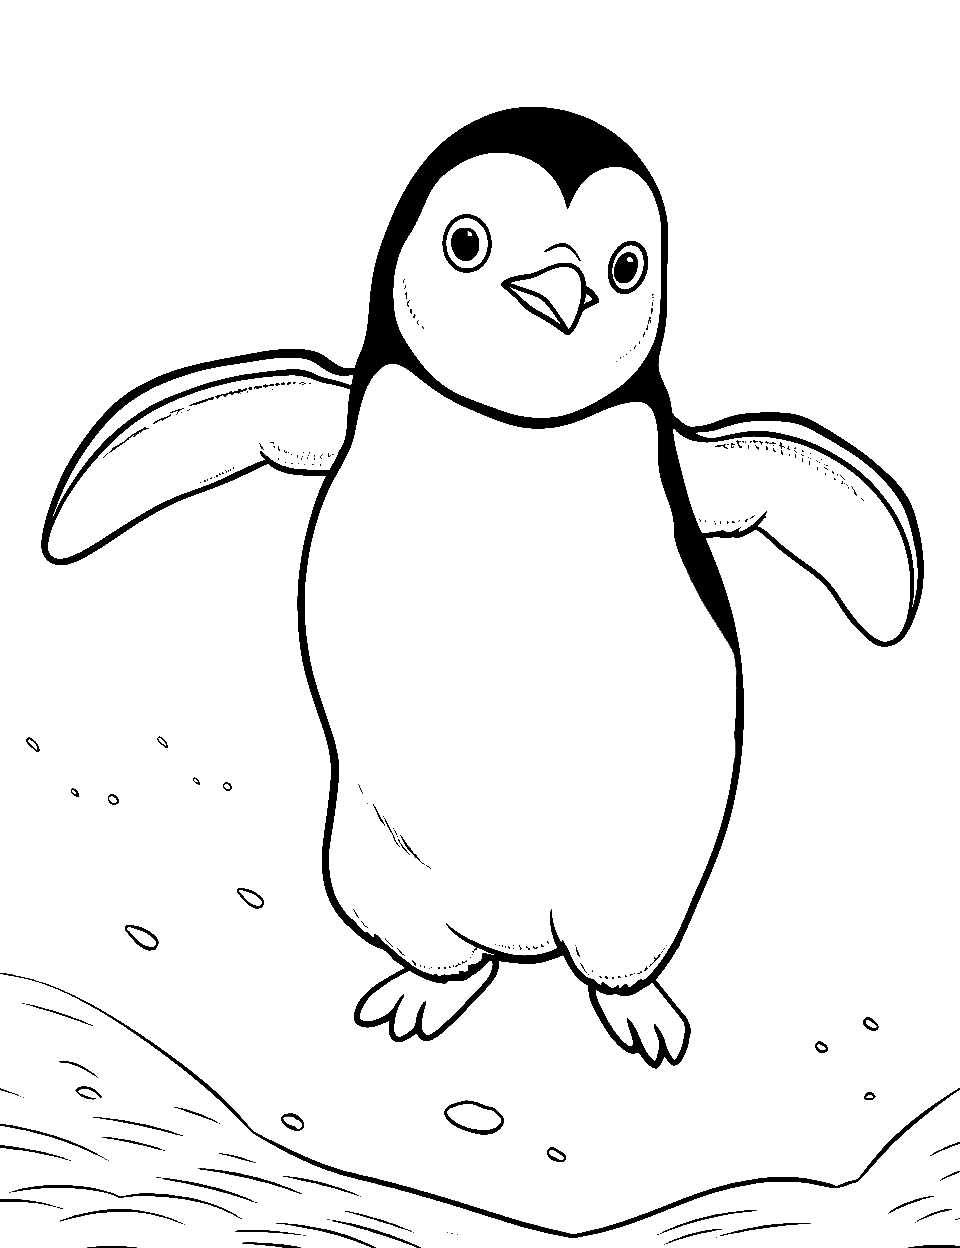 Jumping Penguin Joy Coloring Page - A penguin in mid-air, flapping its flippers in joy.